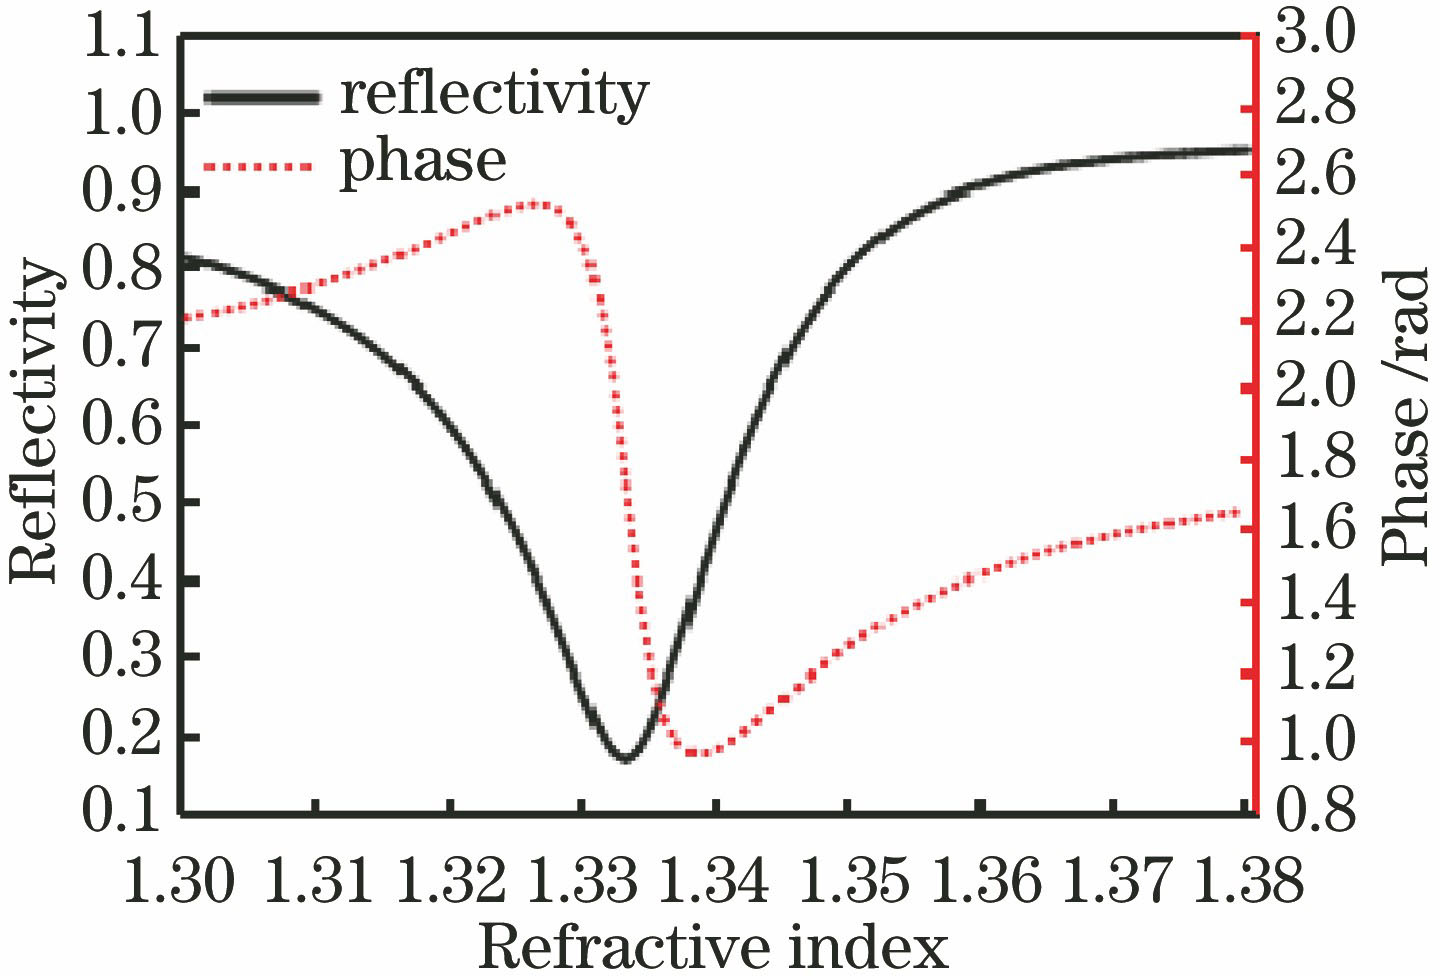 Reflectivity and phase versus refractive index at incident angle of 70.58°